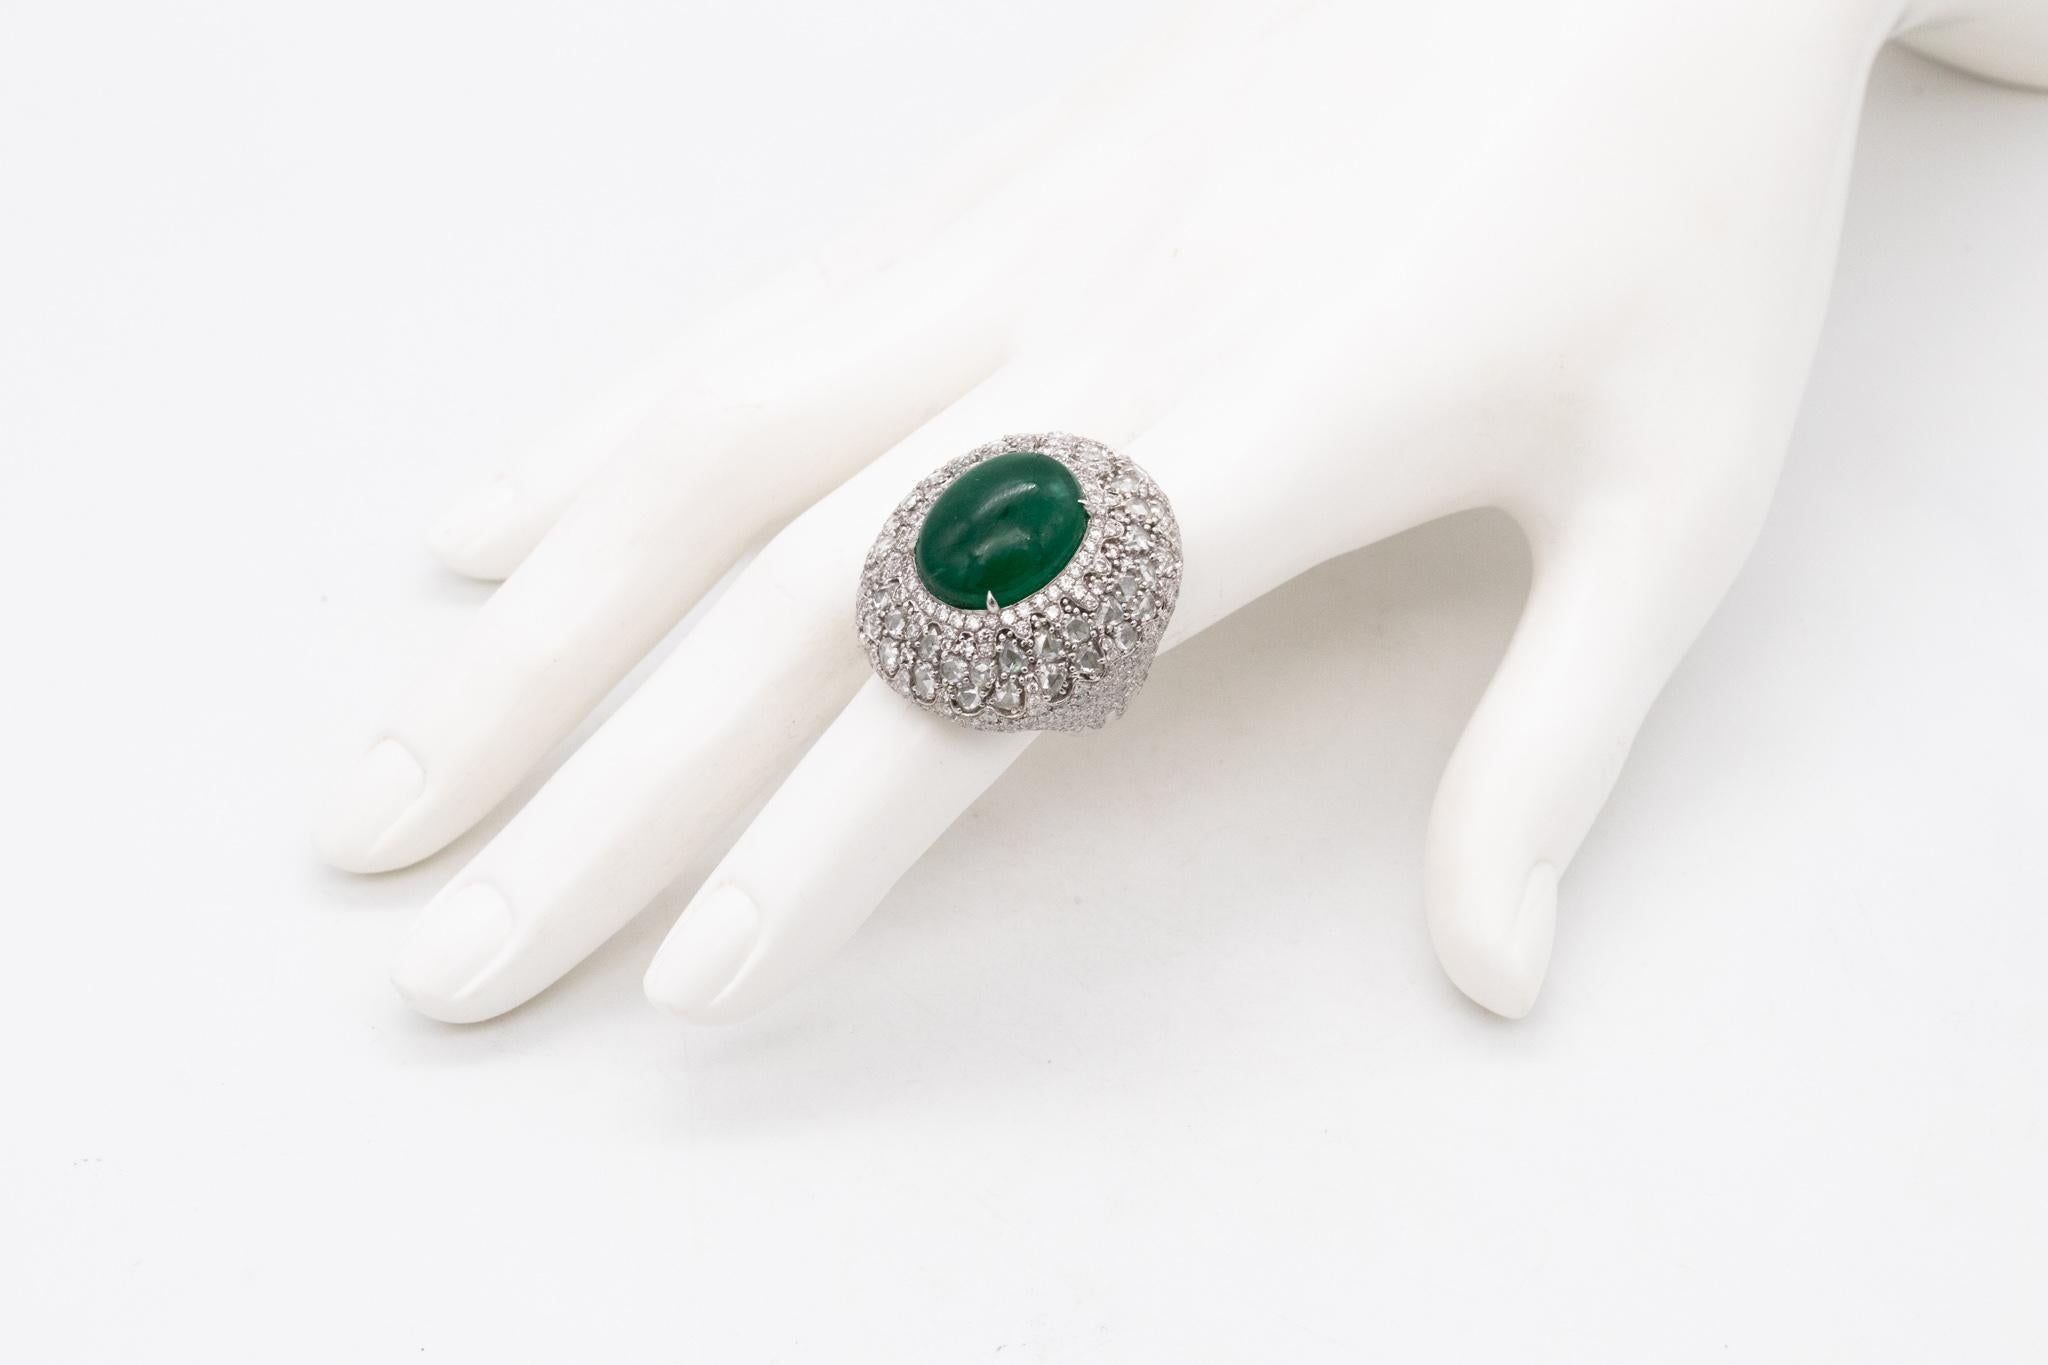 Cabochon Mouawad Modern Cocktail Ring In 18Kt With 18.66 Ctw In Diamonds And Emerald